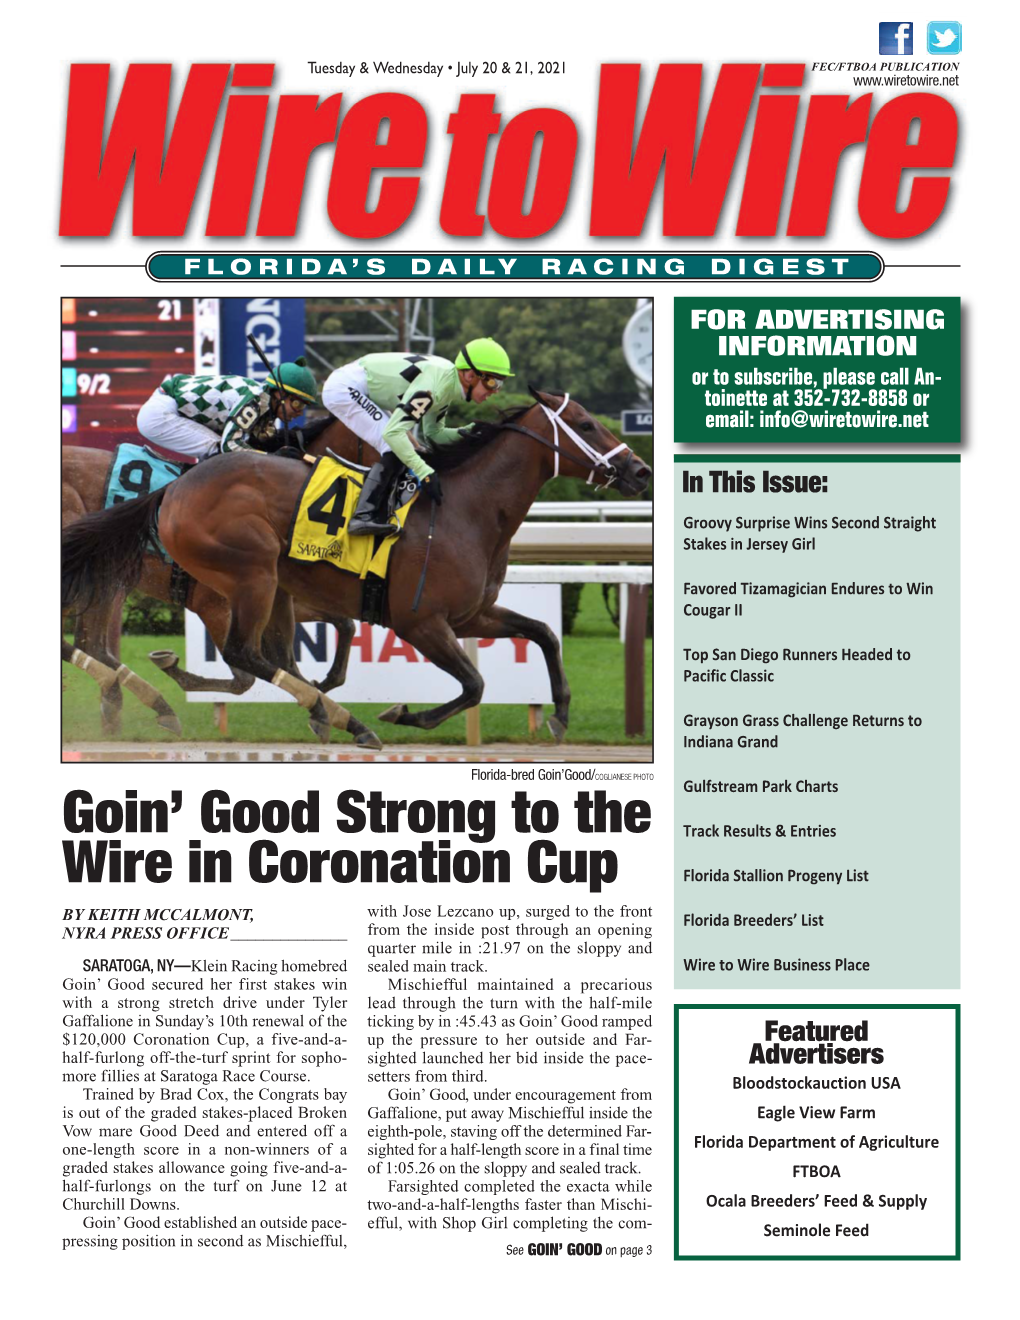 Goin' Good Strong to the Wire in Coronation